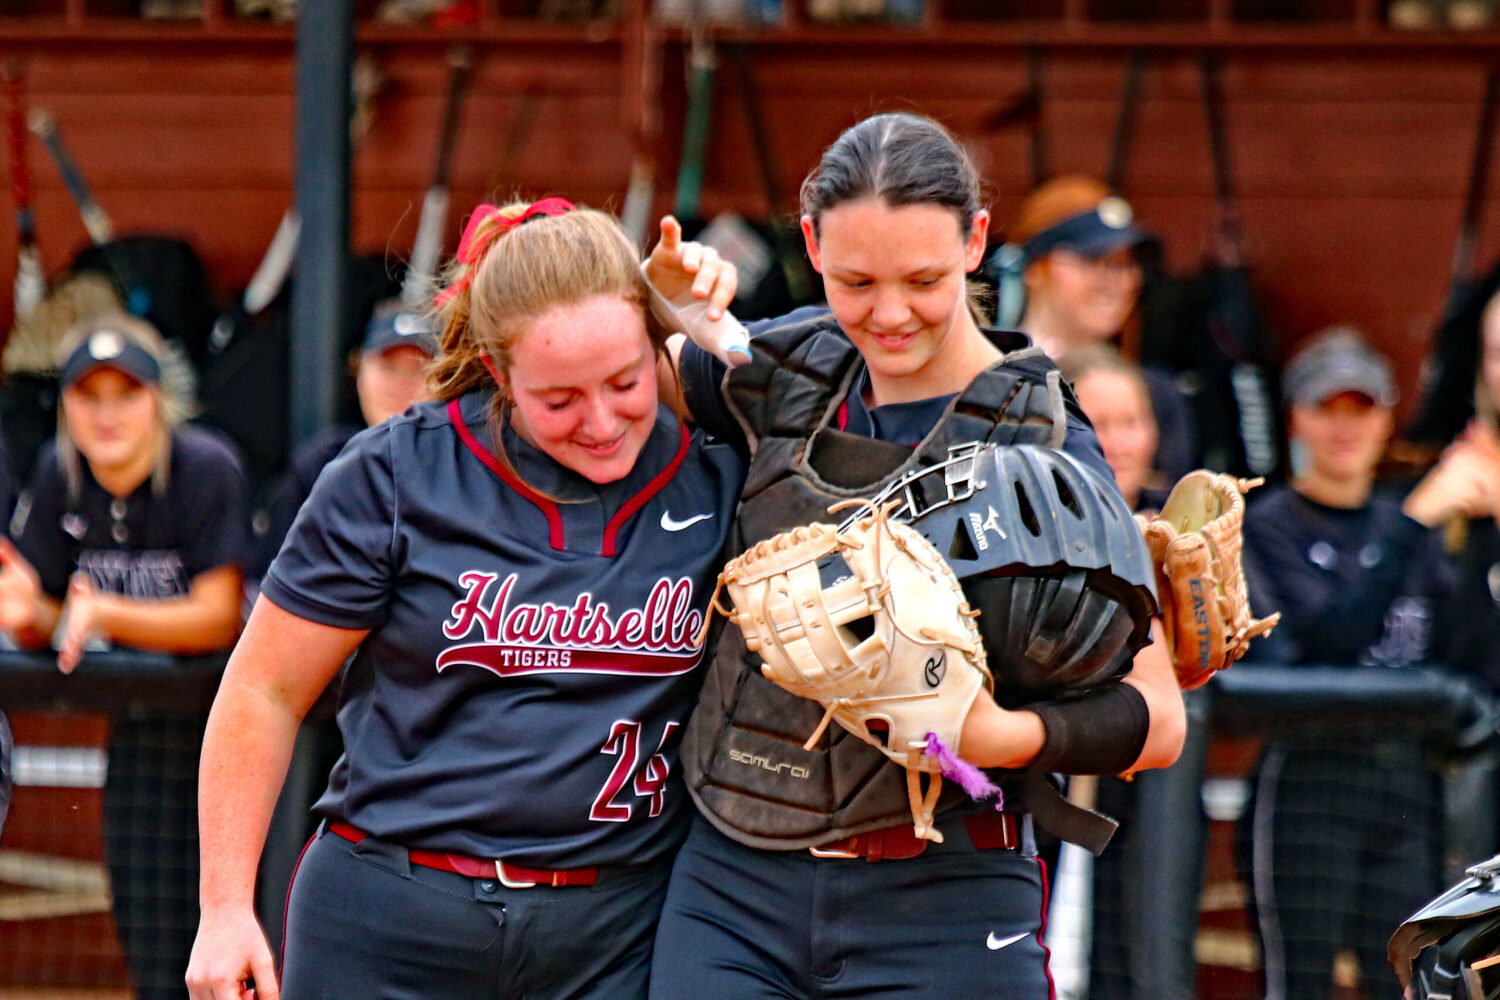 Seniors Sarah Bowling and Aly Putnam embrace following the first pitch of the Tigers game with Hayden. Photo by Jim Meadows